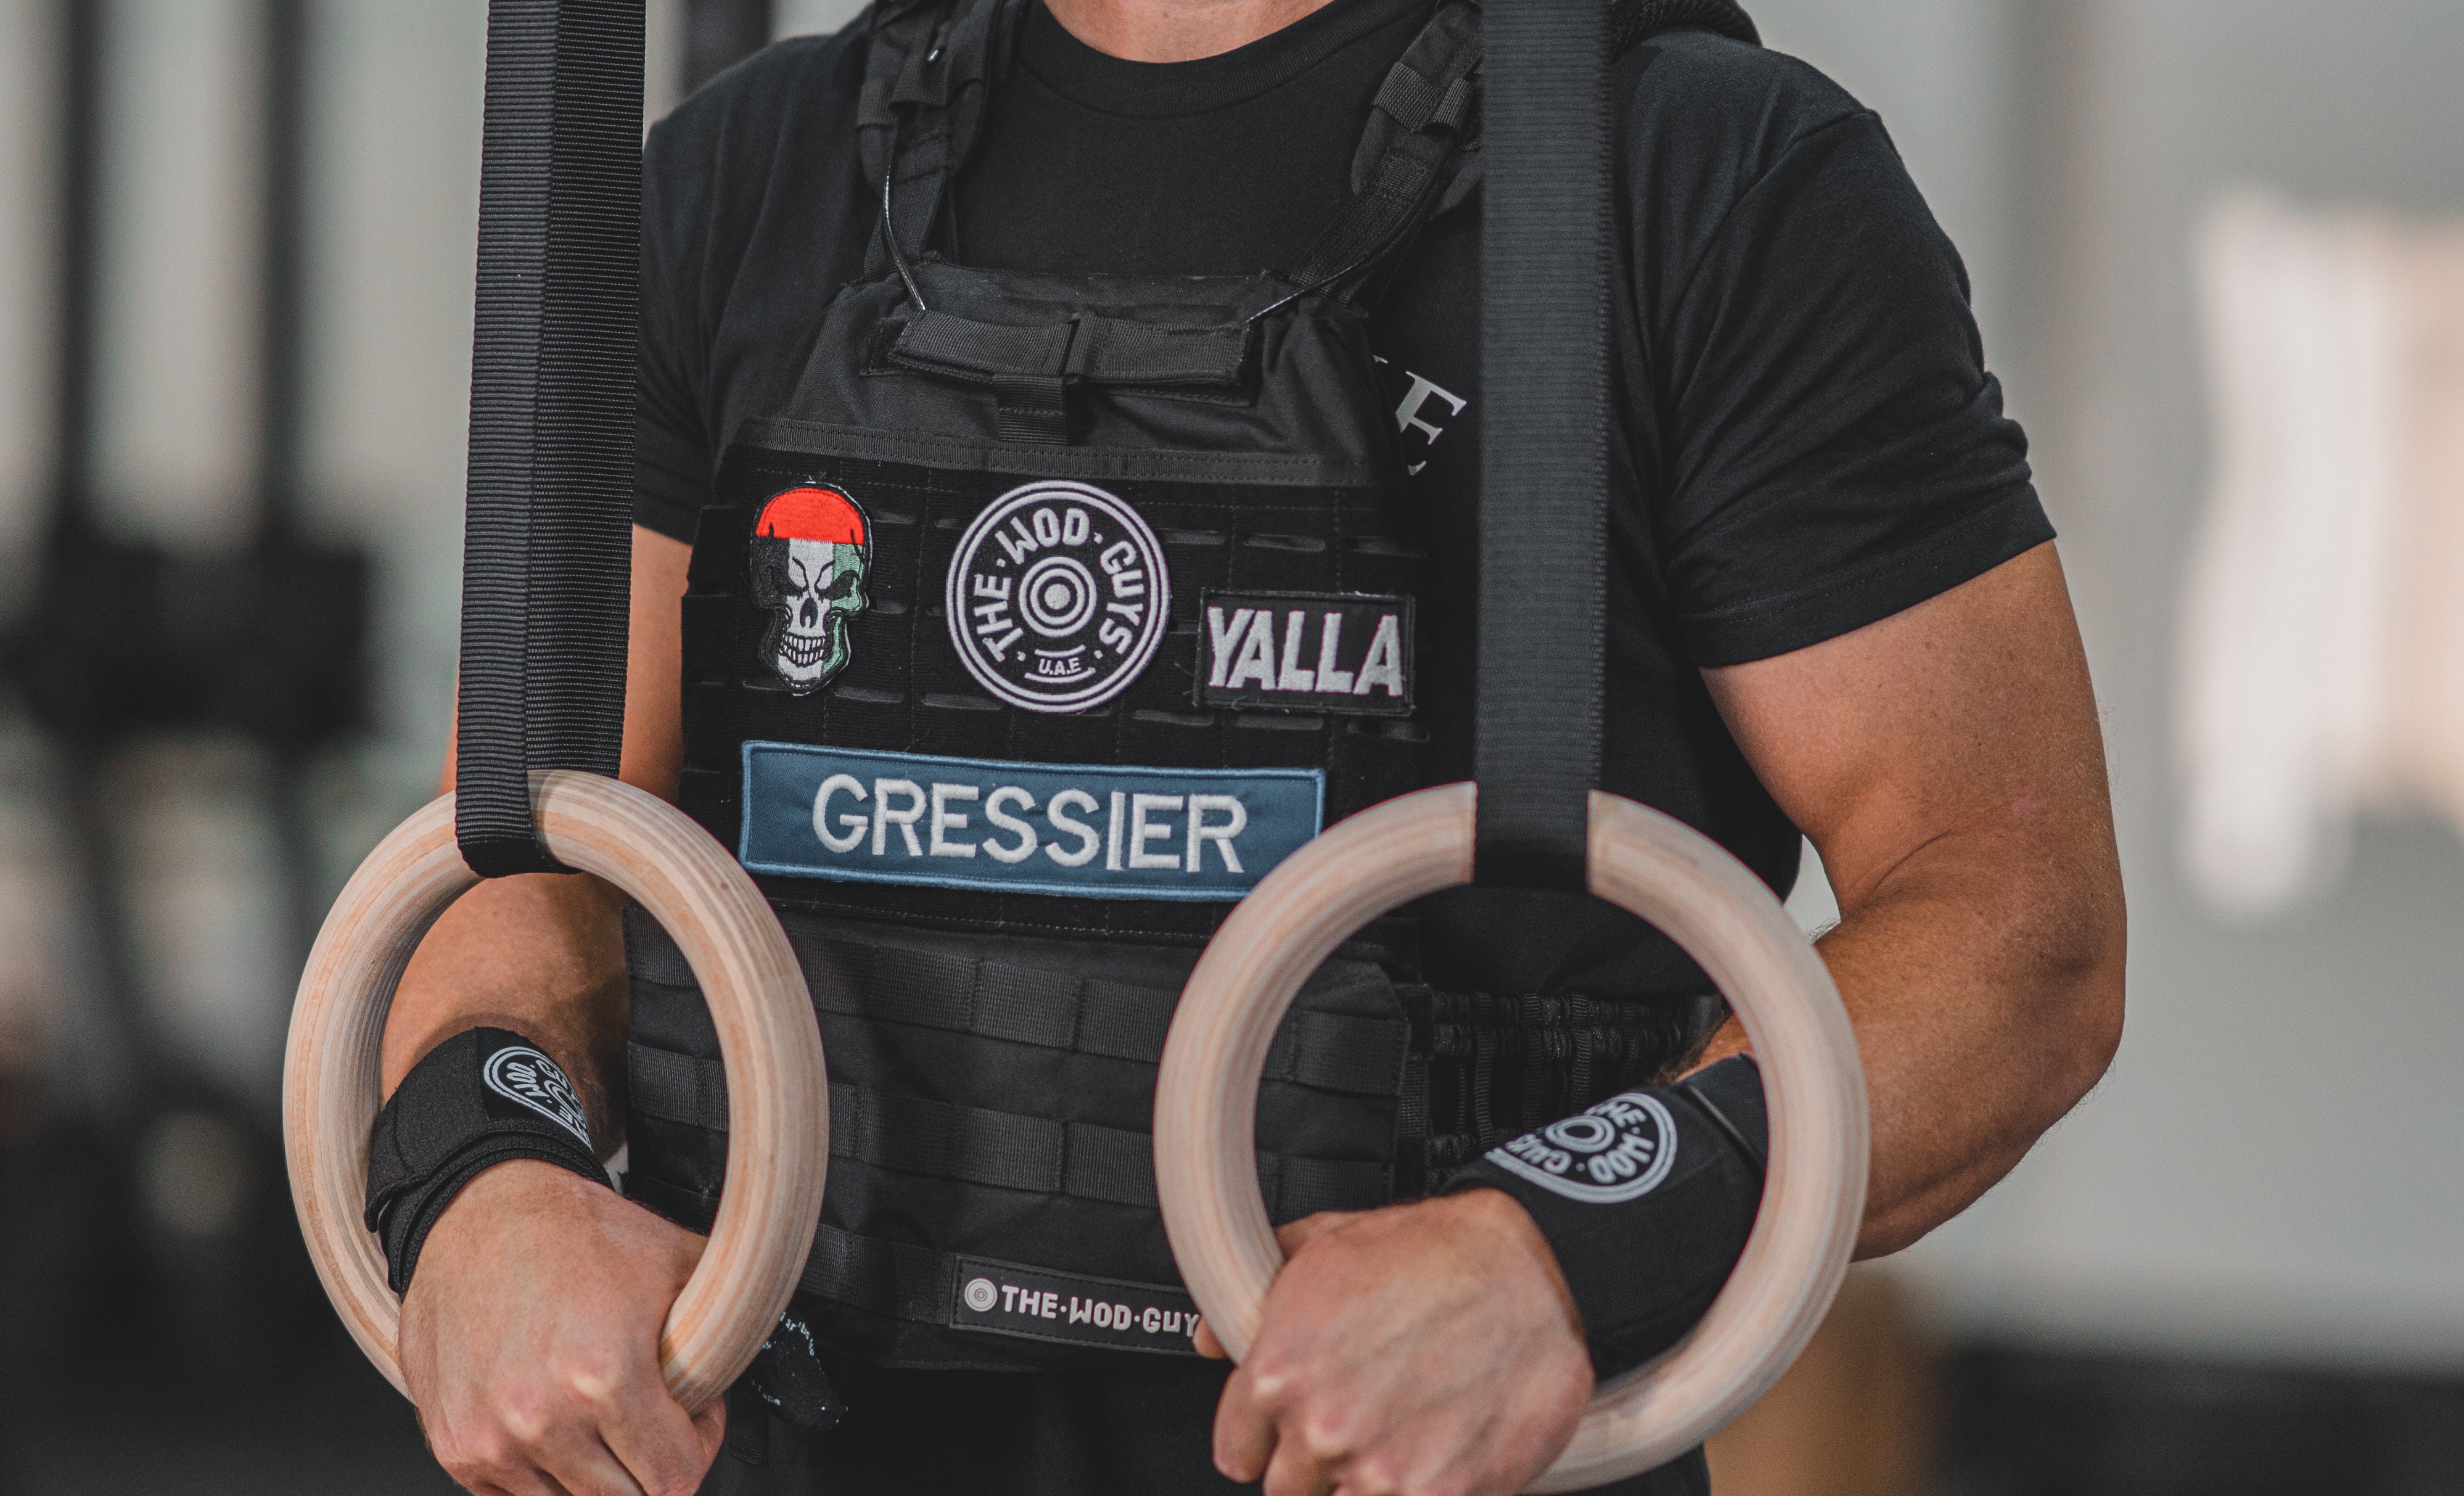 Looking for Velcro Patches & Stickers? Visit The WOD Guys – THE